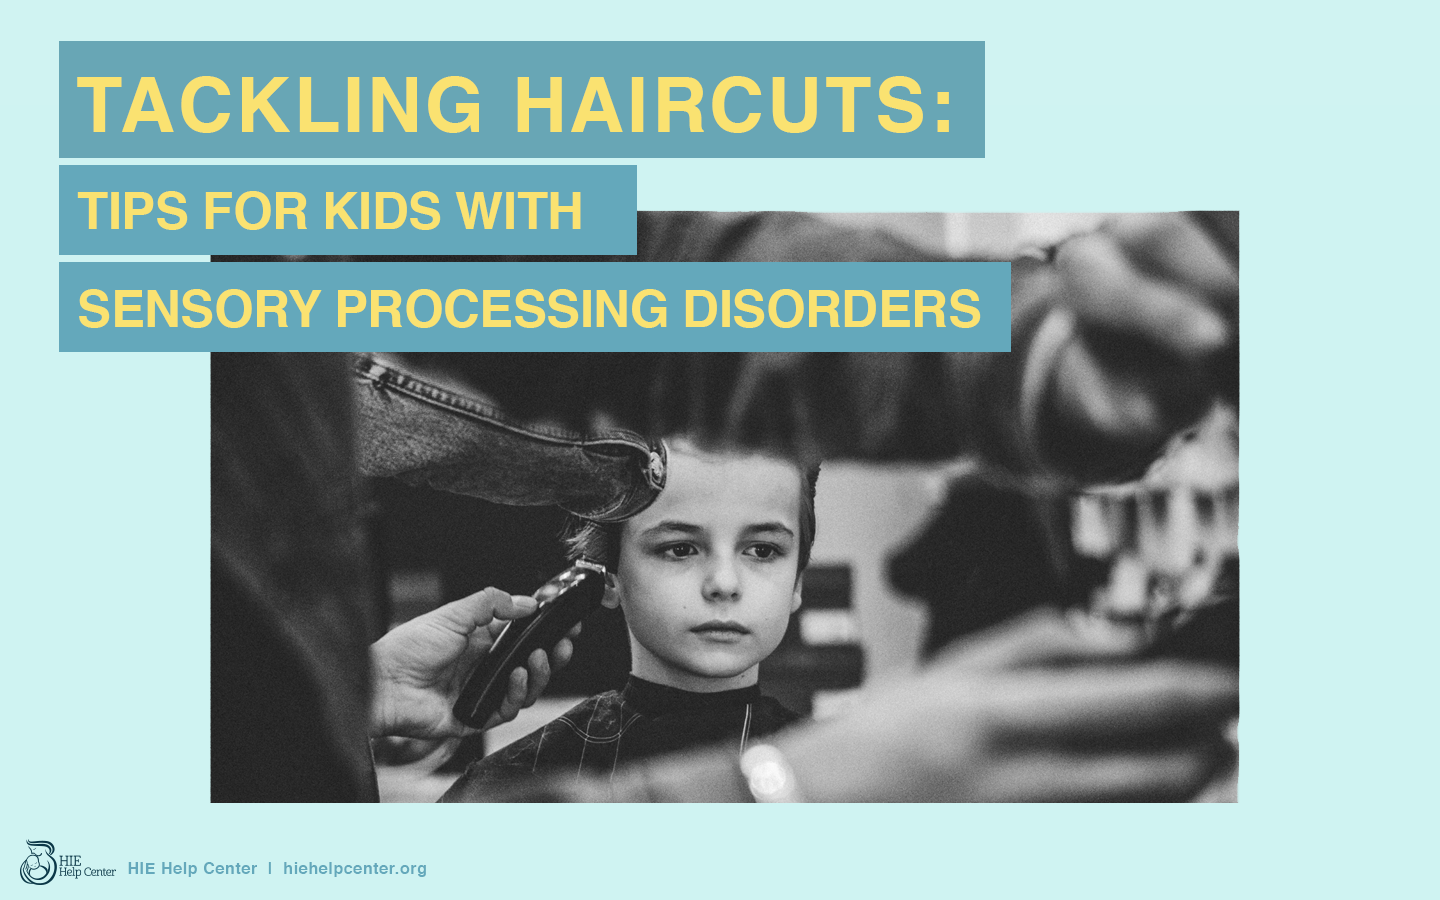 Haircut Tips for Kids with Autism and Sensory Processing Disorders